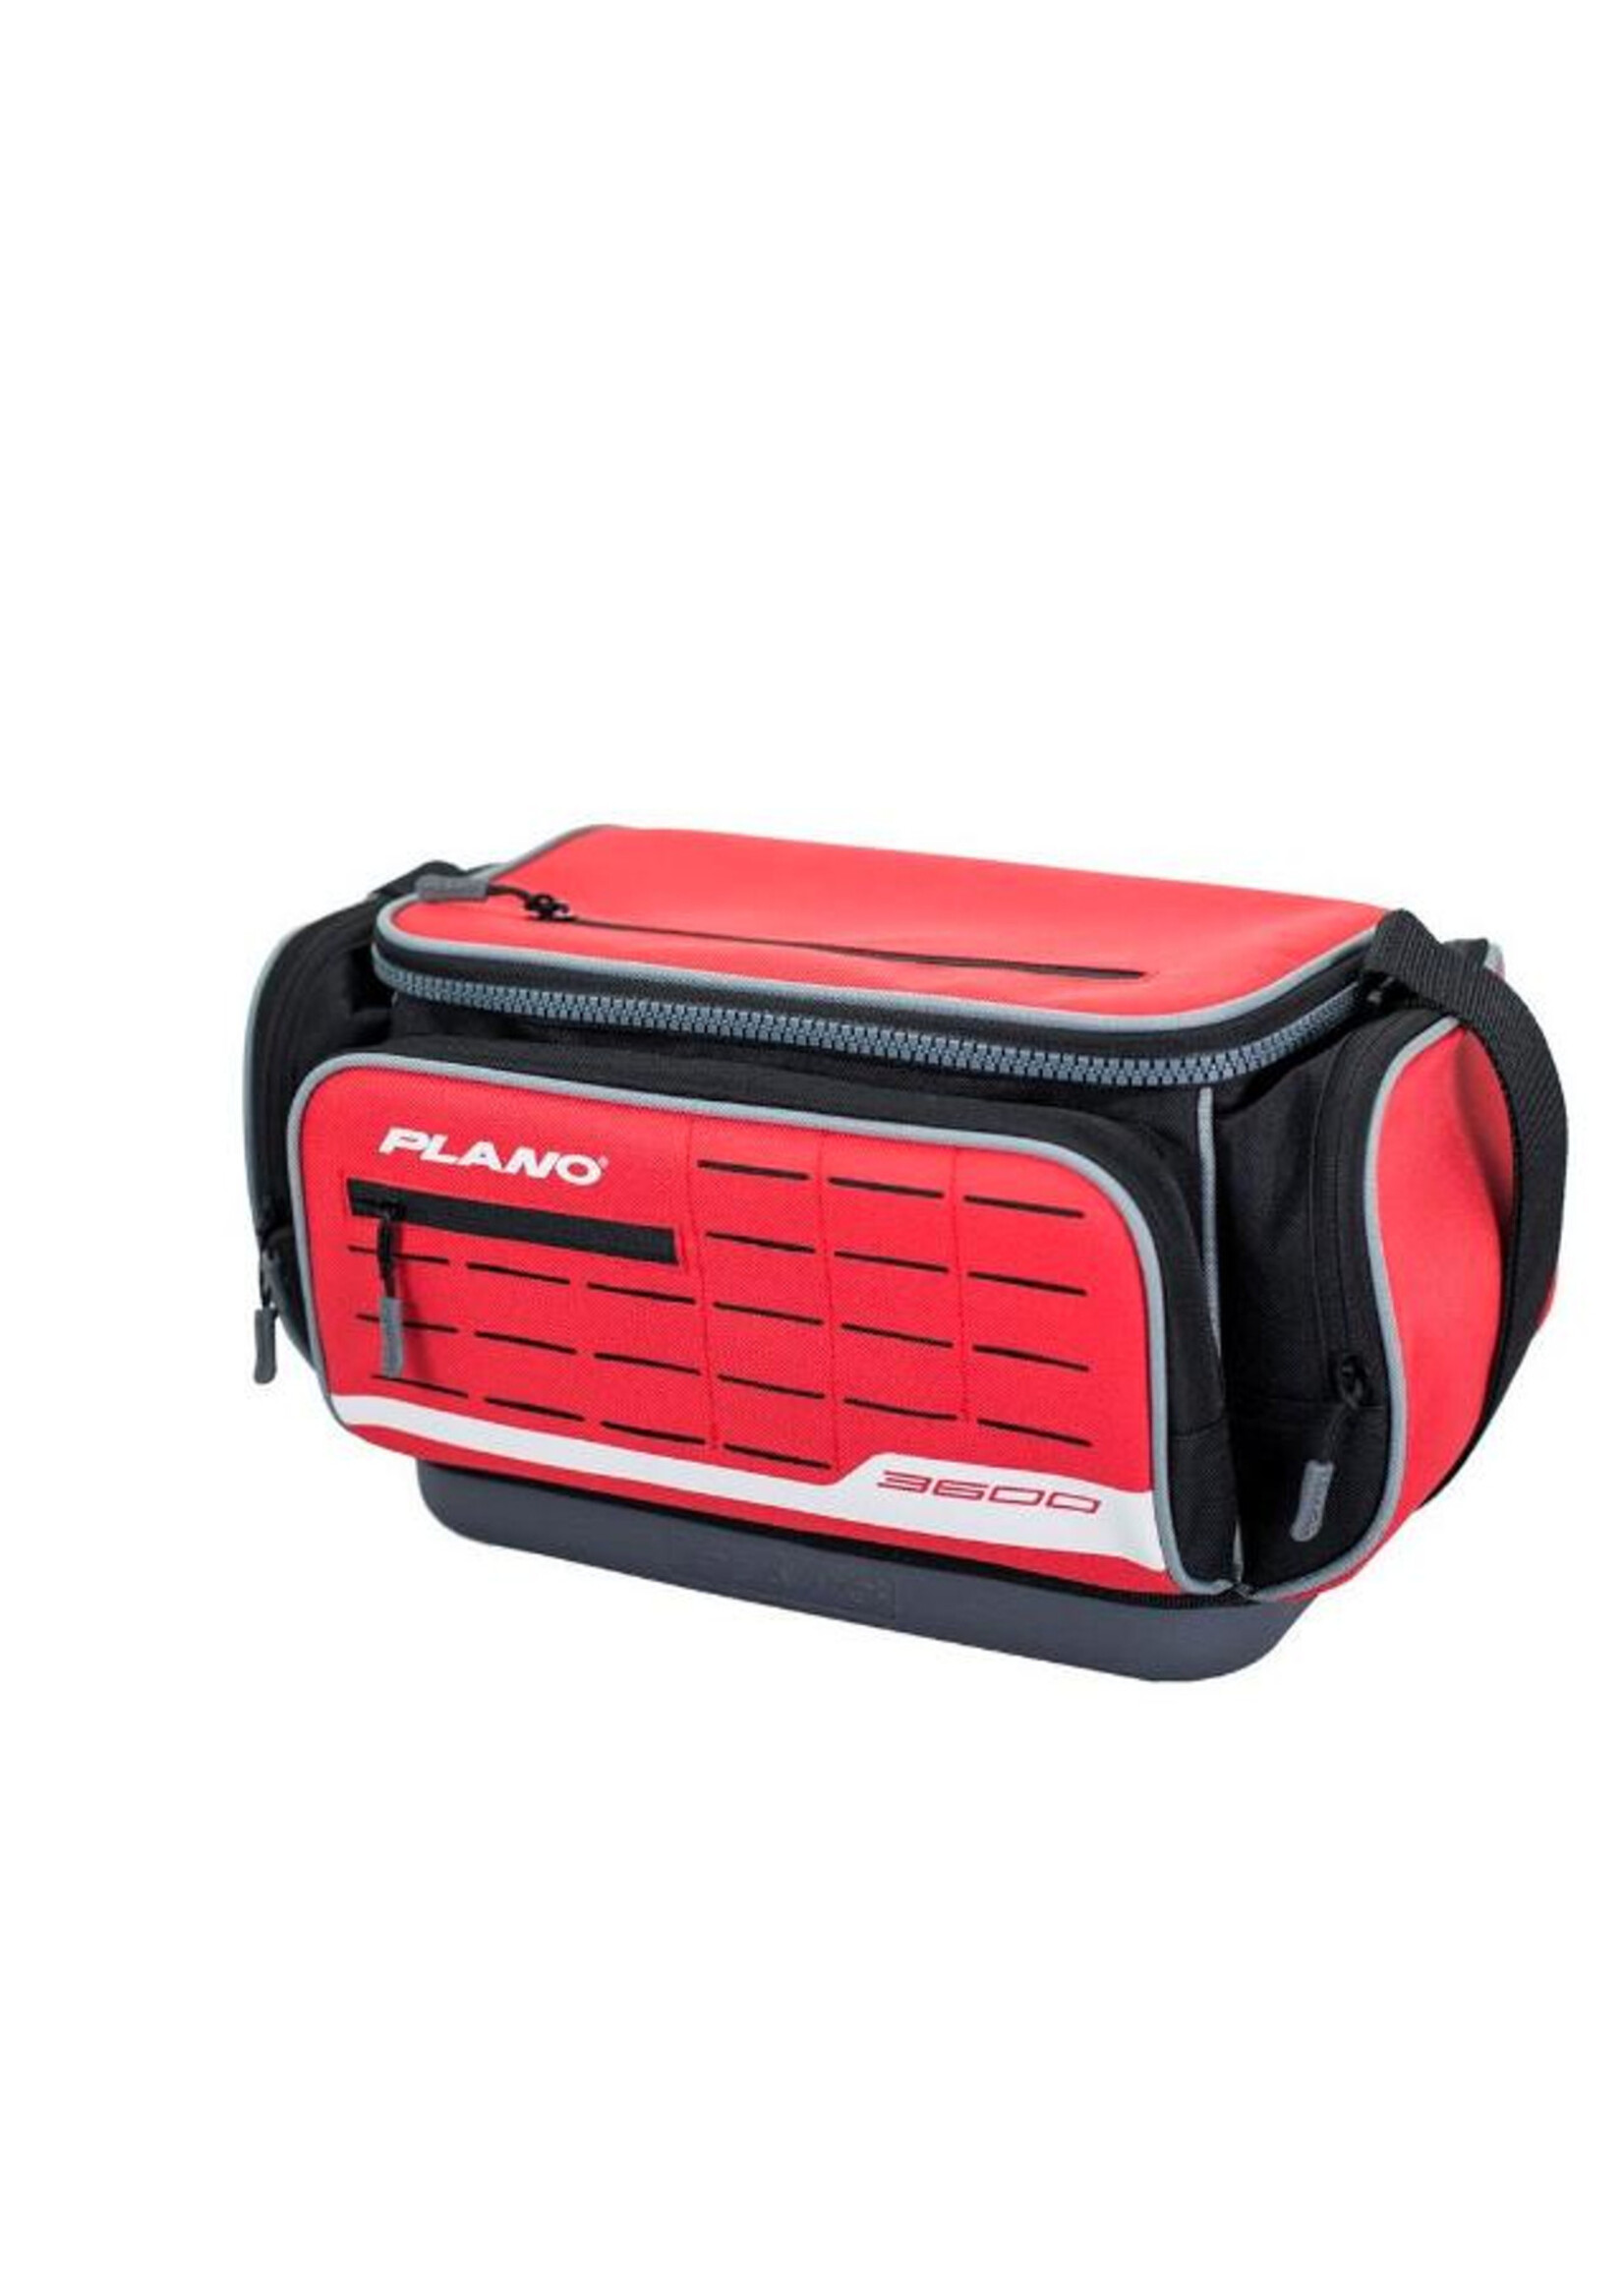 Plano Plano Weekend Series 3600 Deluxe Tackle Bag